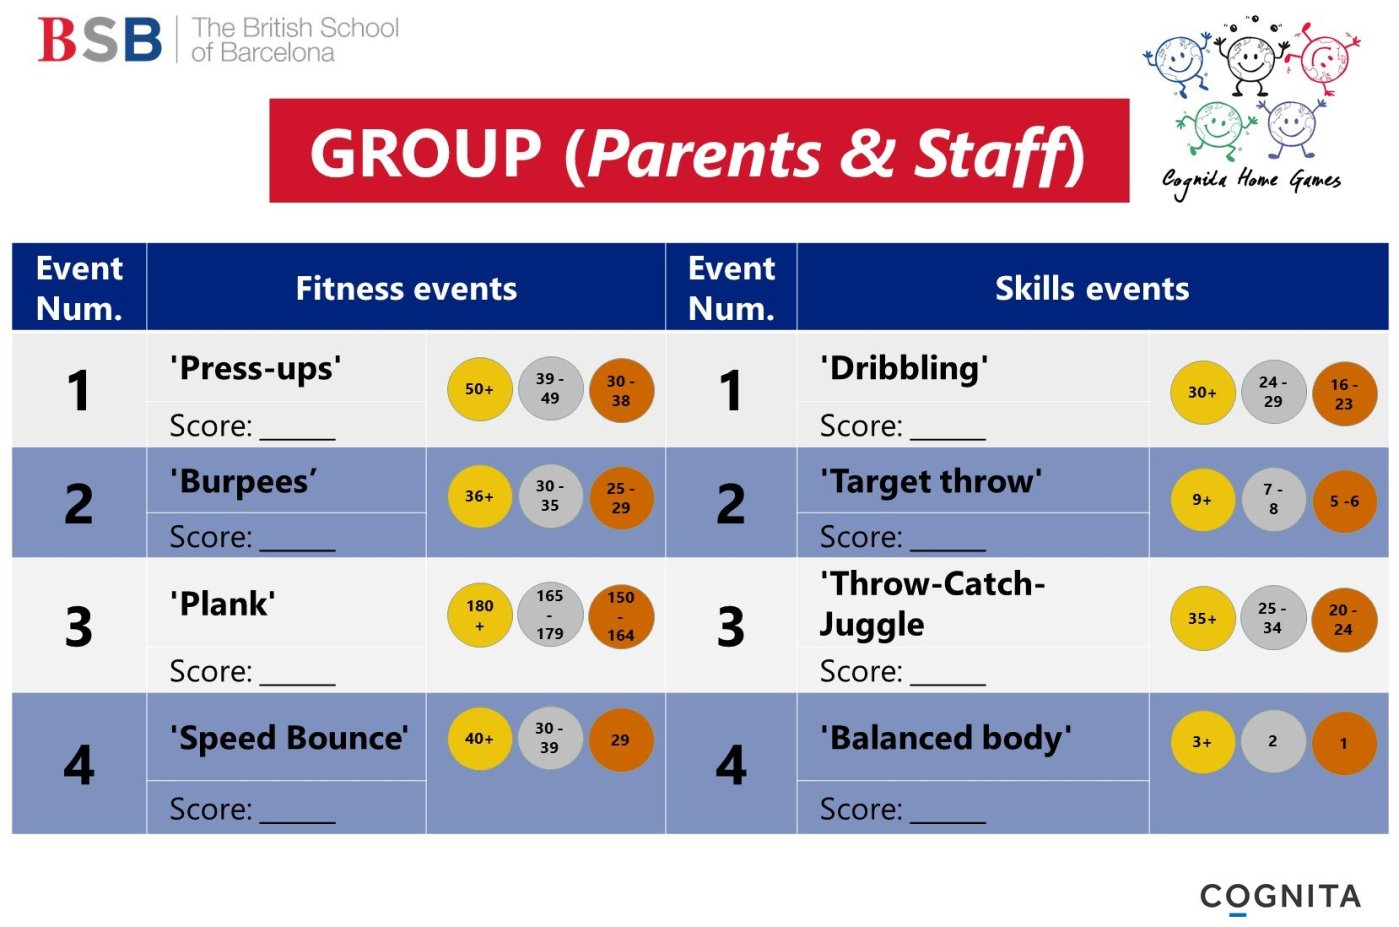 BSB - Score Card for Group - Parents Staff